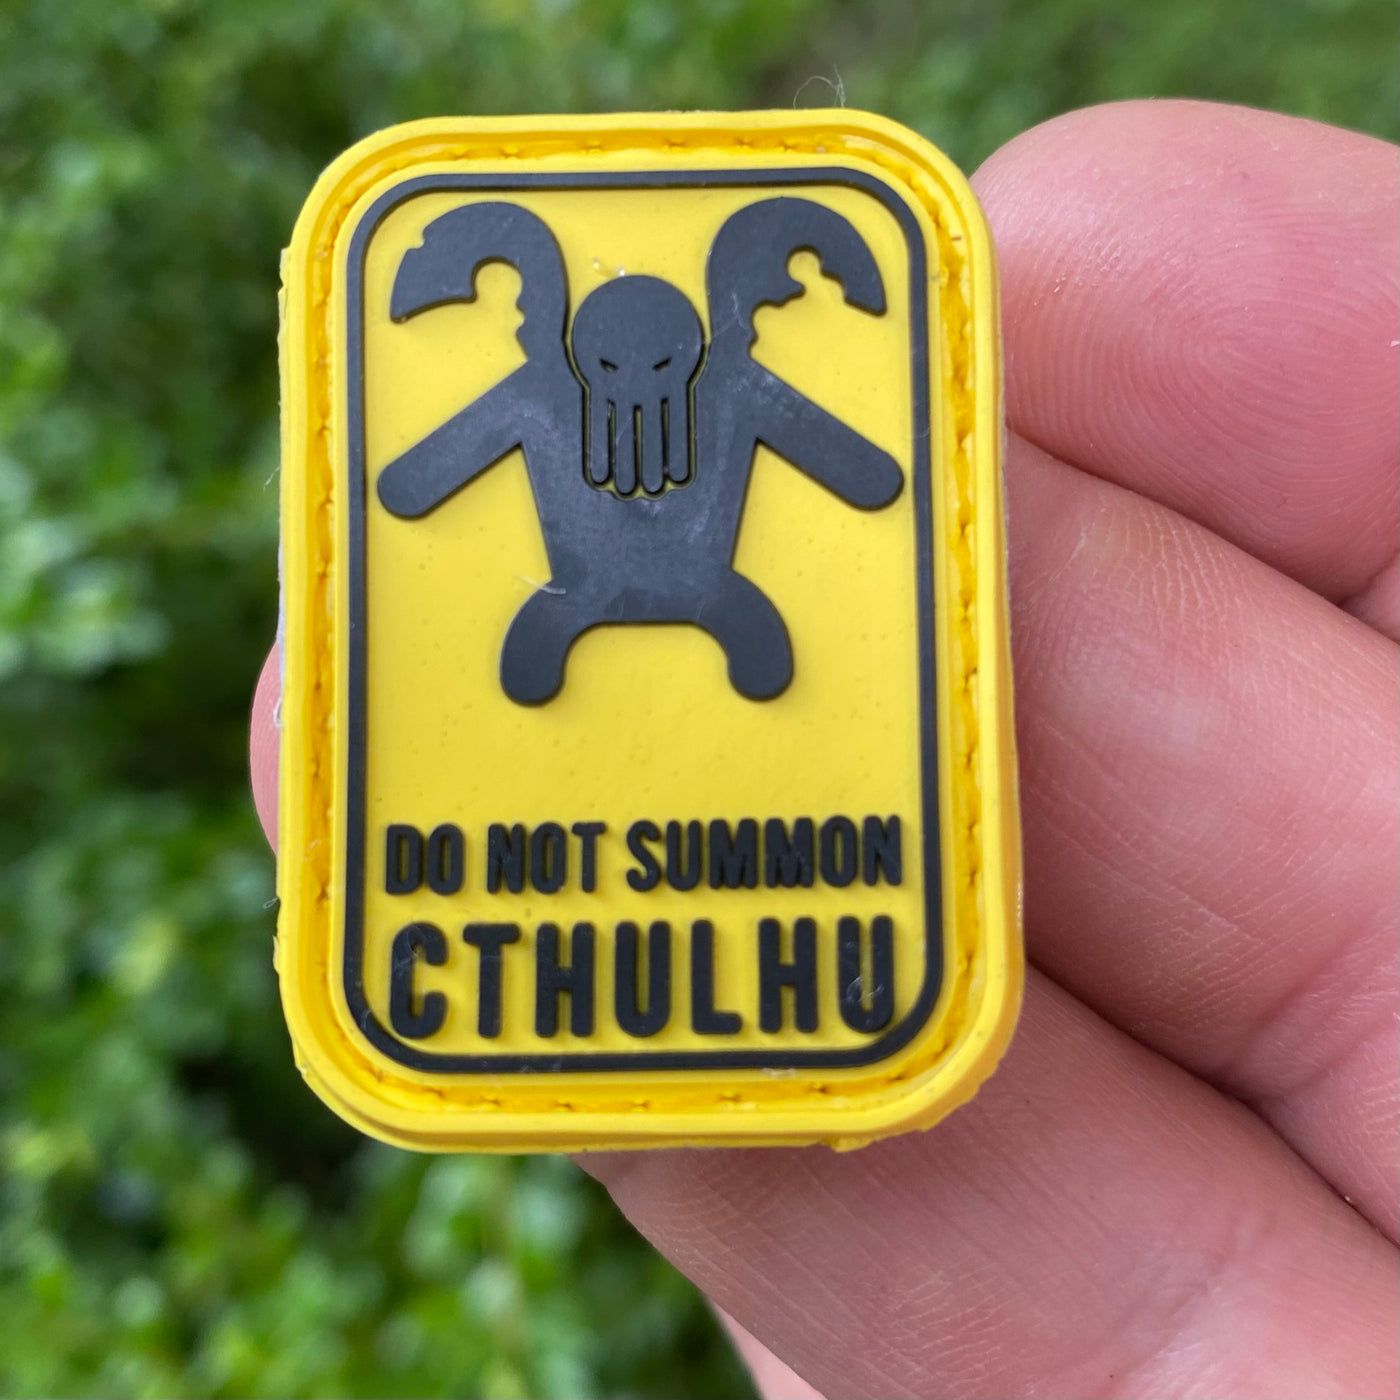 DO NOT summon Cthulhu - PVC patch